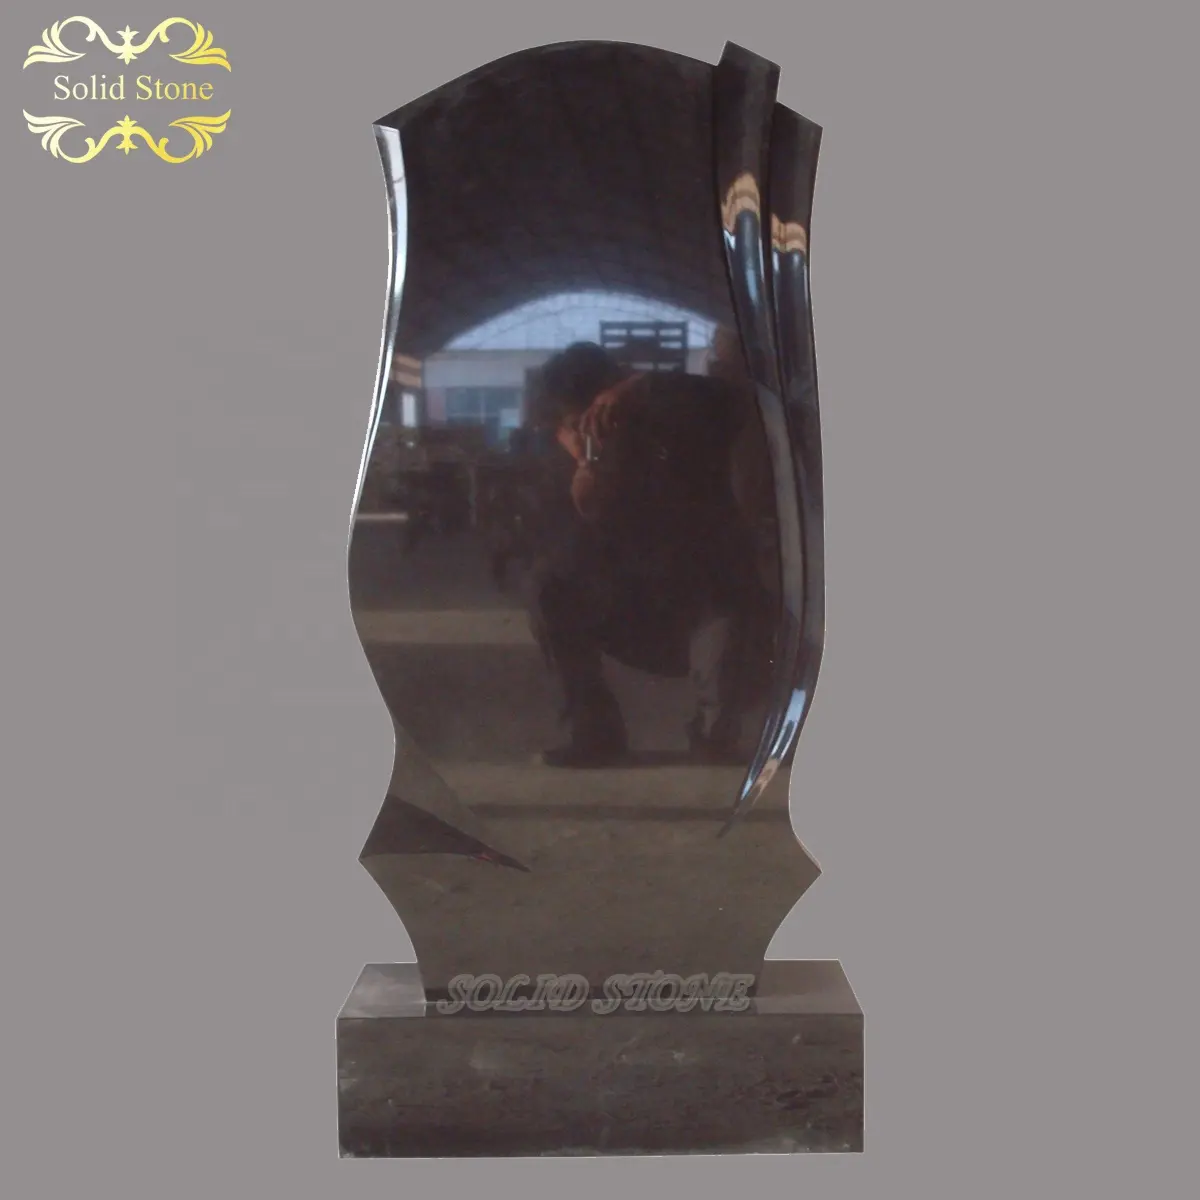 High quality hand carved modern style black granite tombstone monument